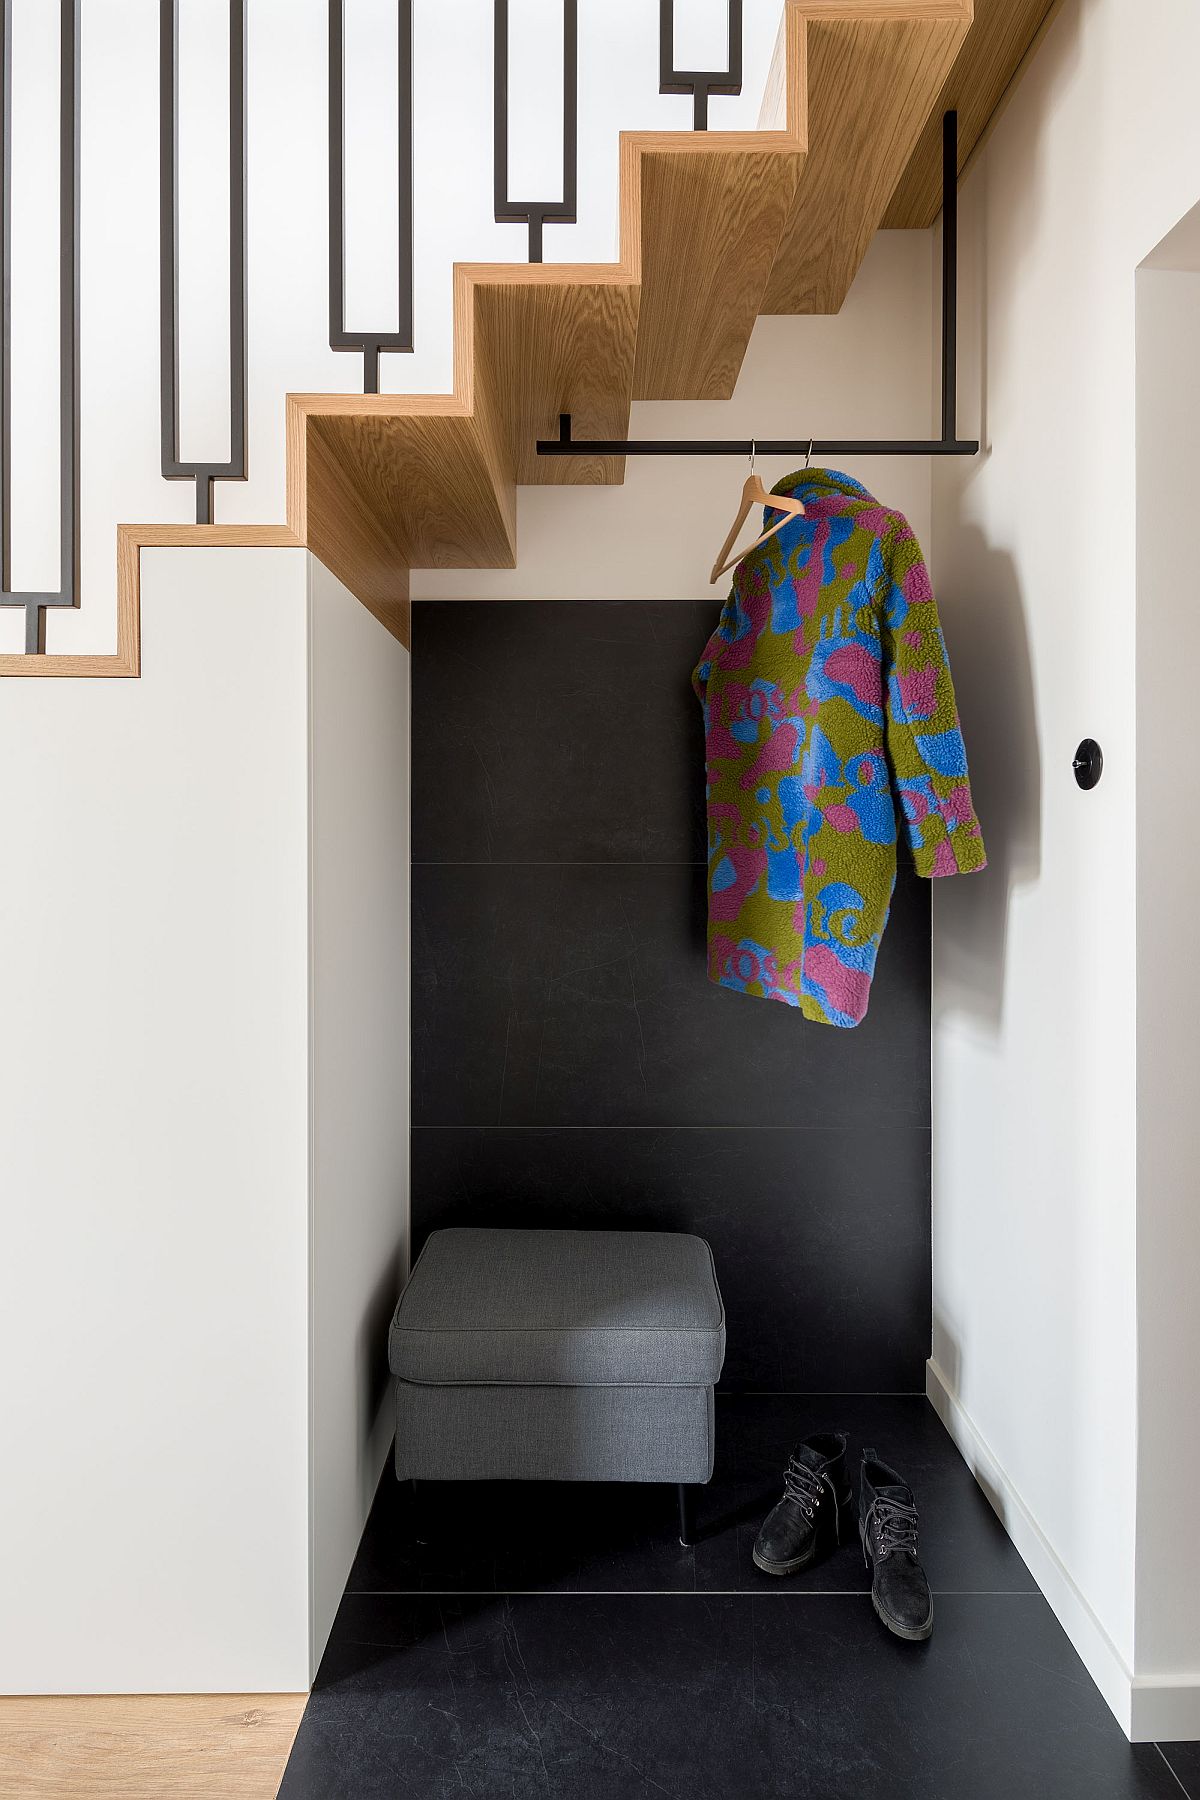 Aclove-at-the-entrance-of-the-house-with-space-for-coats-and-boots-87567